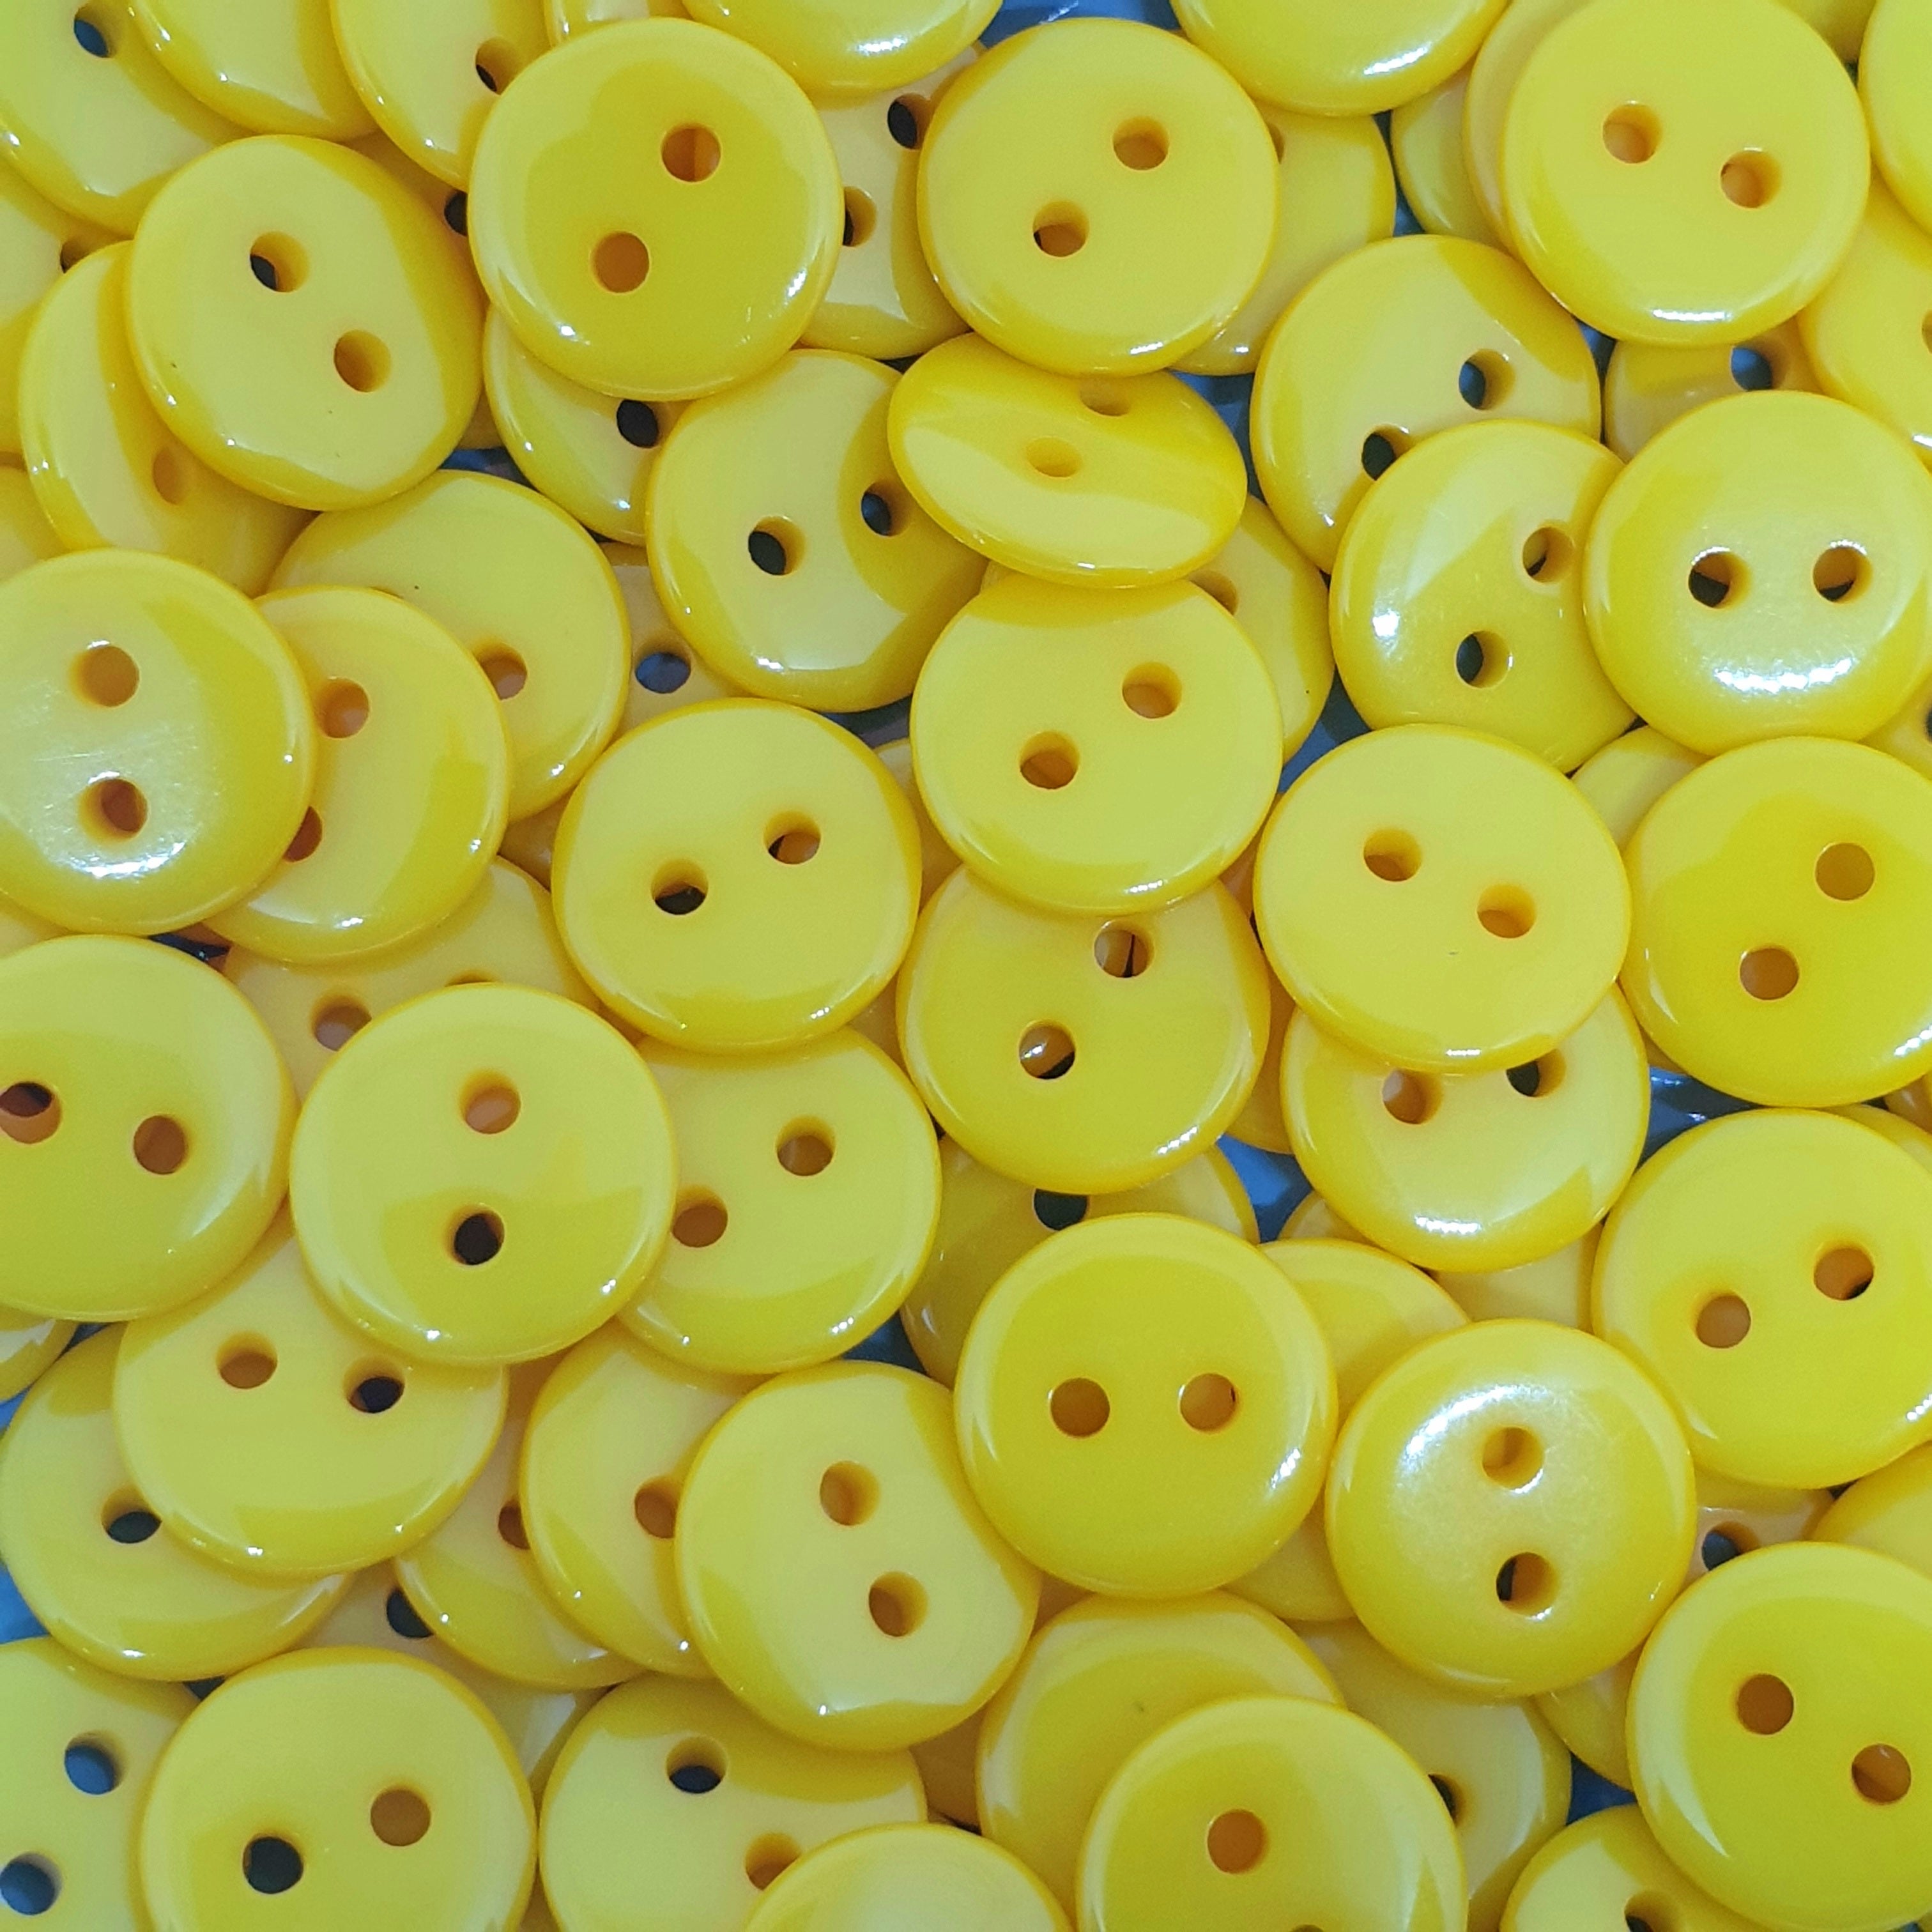 MajorCrafts 120pcs 10mm Dark Yellow 2 Holes Small Round Resin Sewing Buttons B8